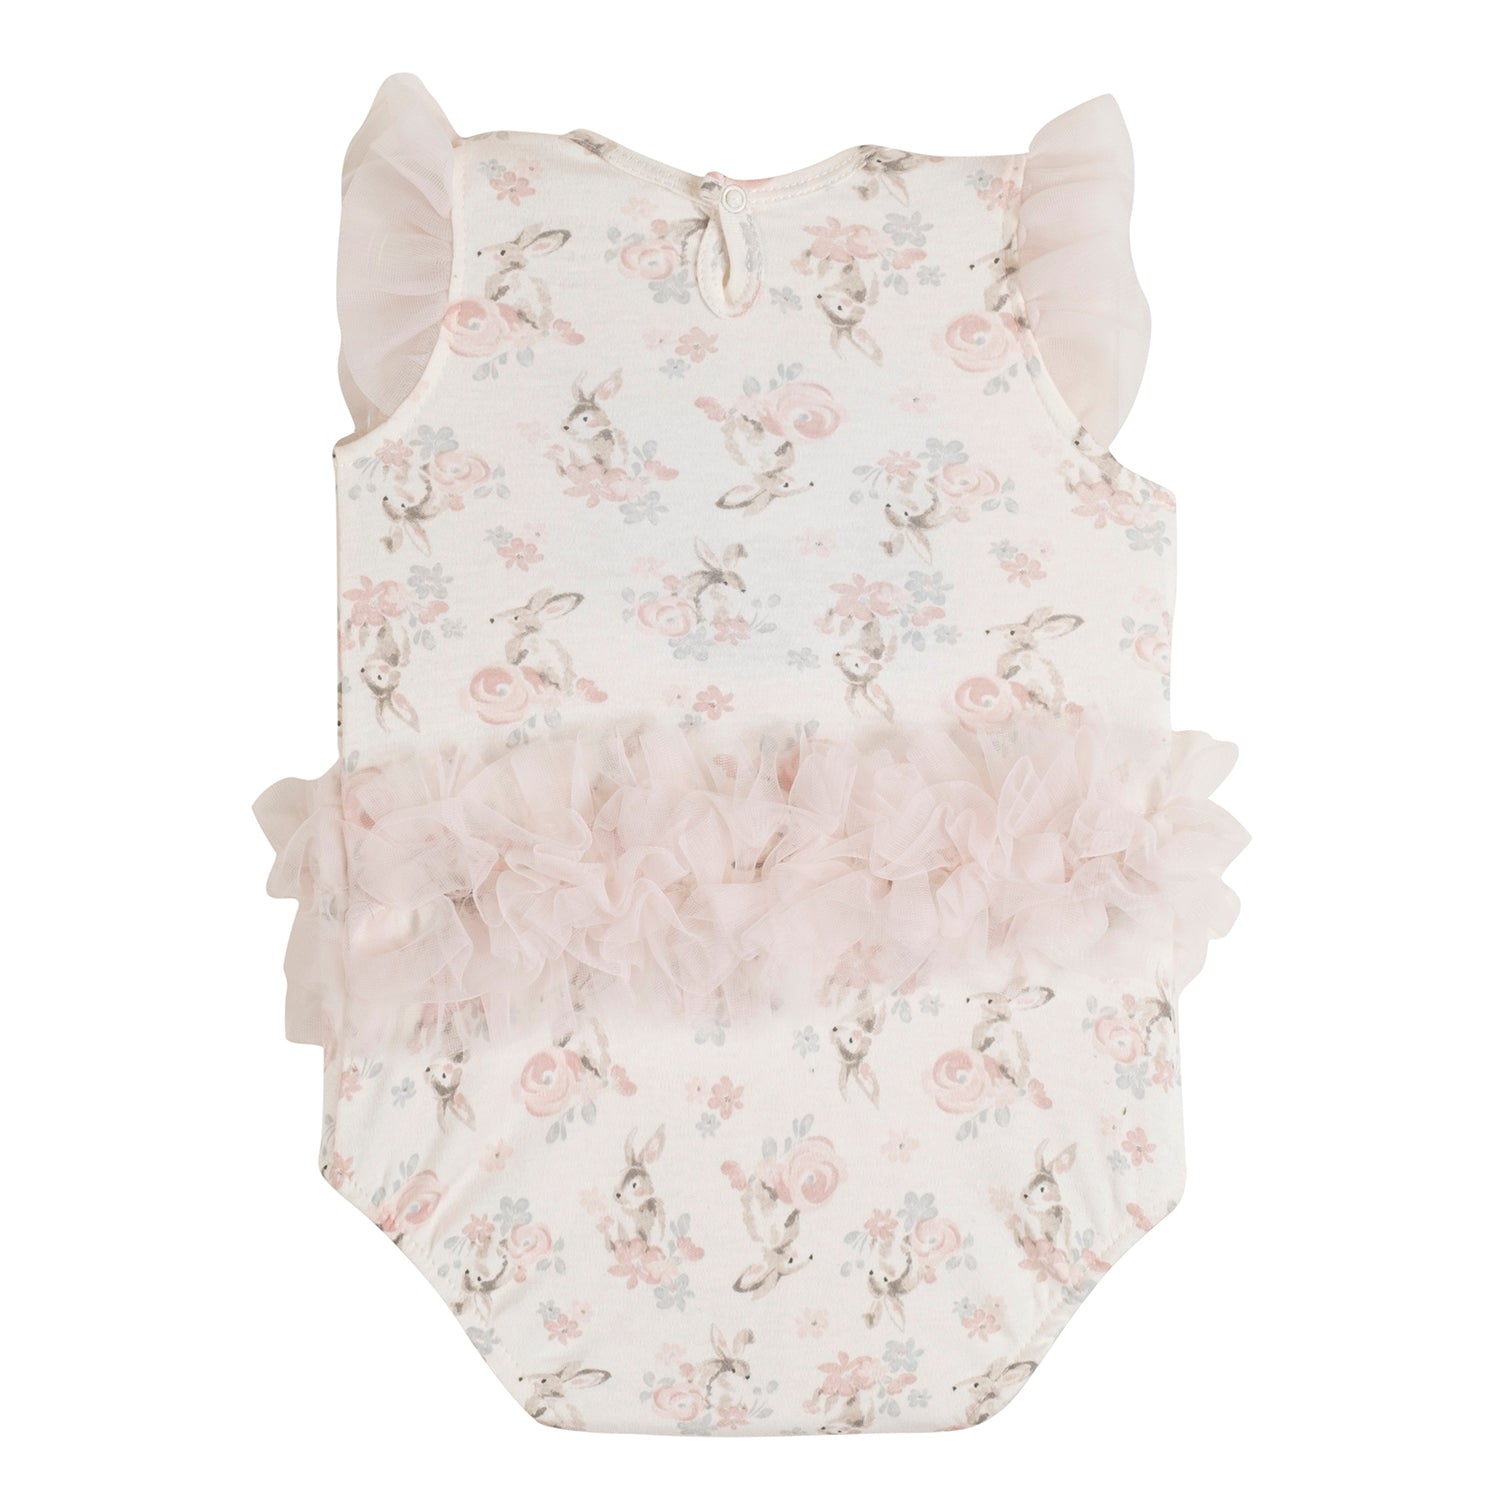 Baby Moo Floral Gift Set 3 Piece With Bodysuit, Socks And Headband - Peach